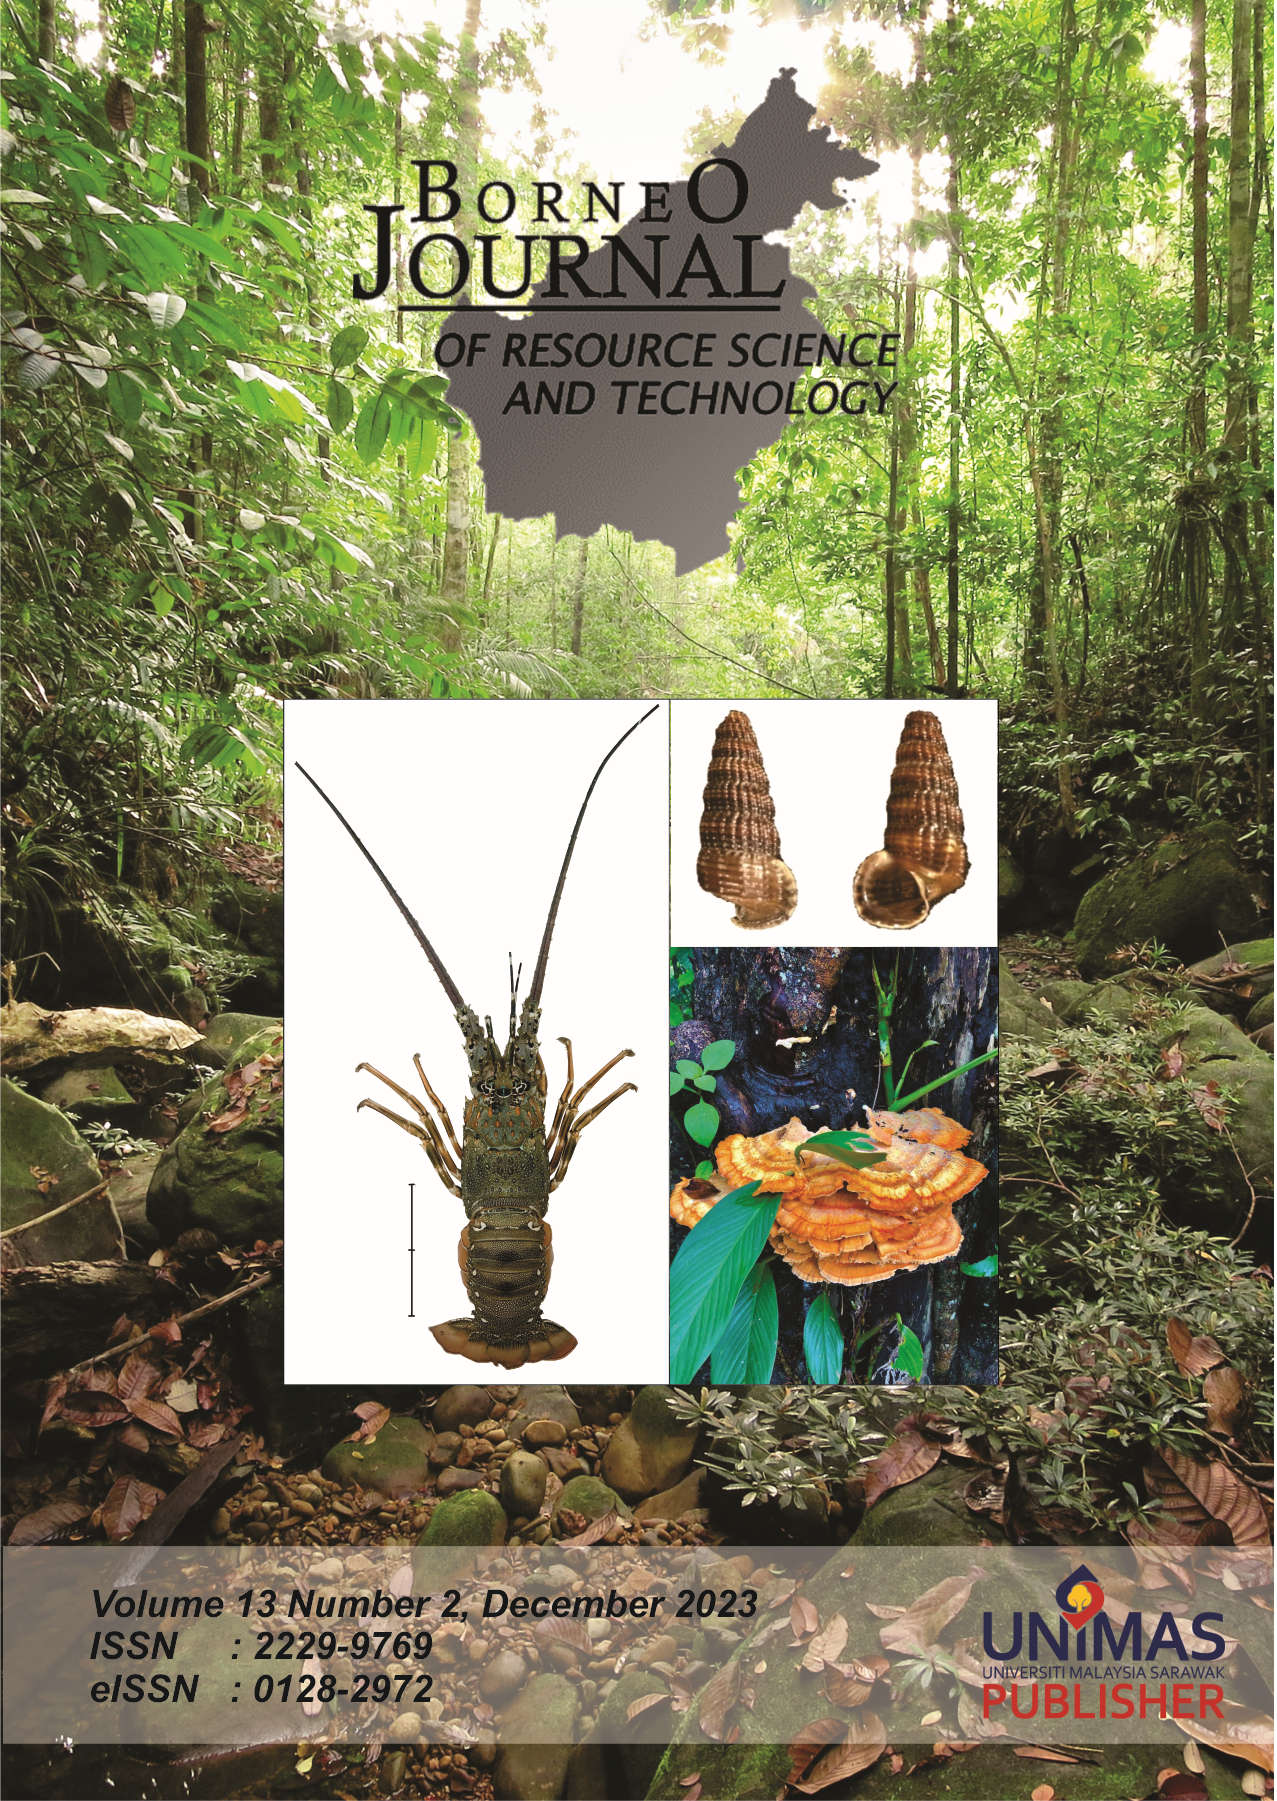 					View Vol. 13 No. 2 (2023): Borneo Journal of Resource Science and Technology
				